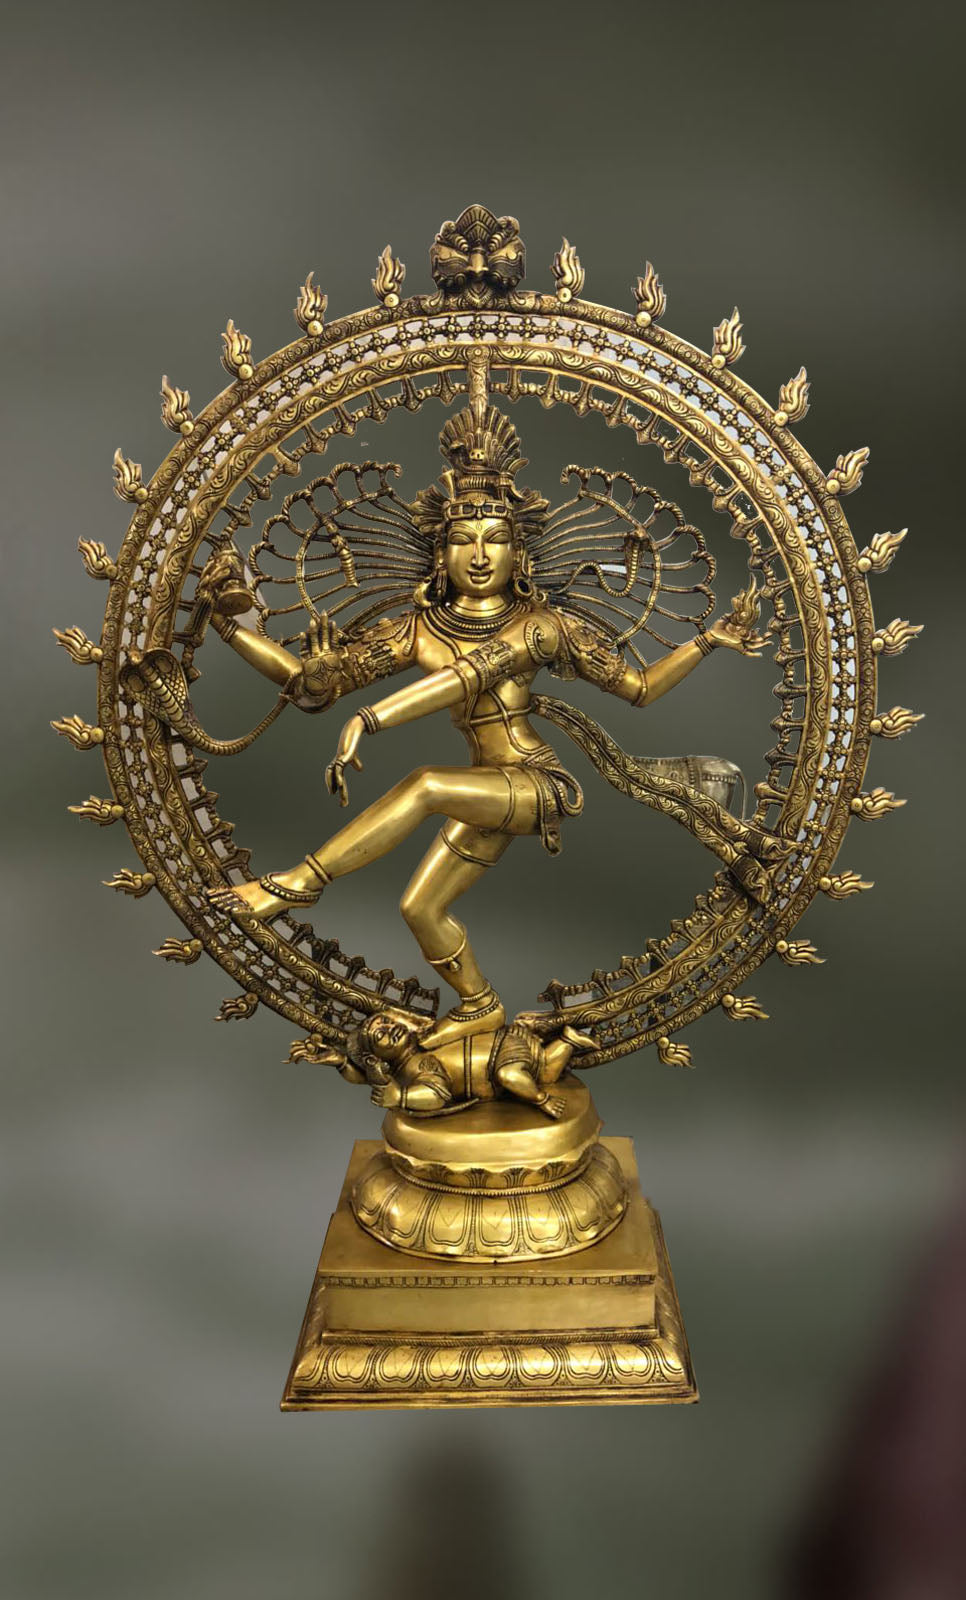 Nataraja: The Lord of All the Three Worlds - Artisans Crest